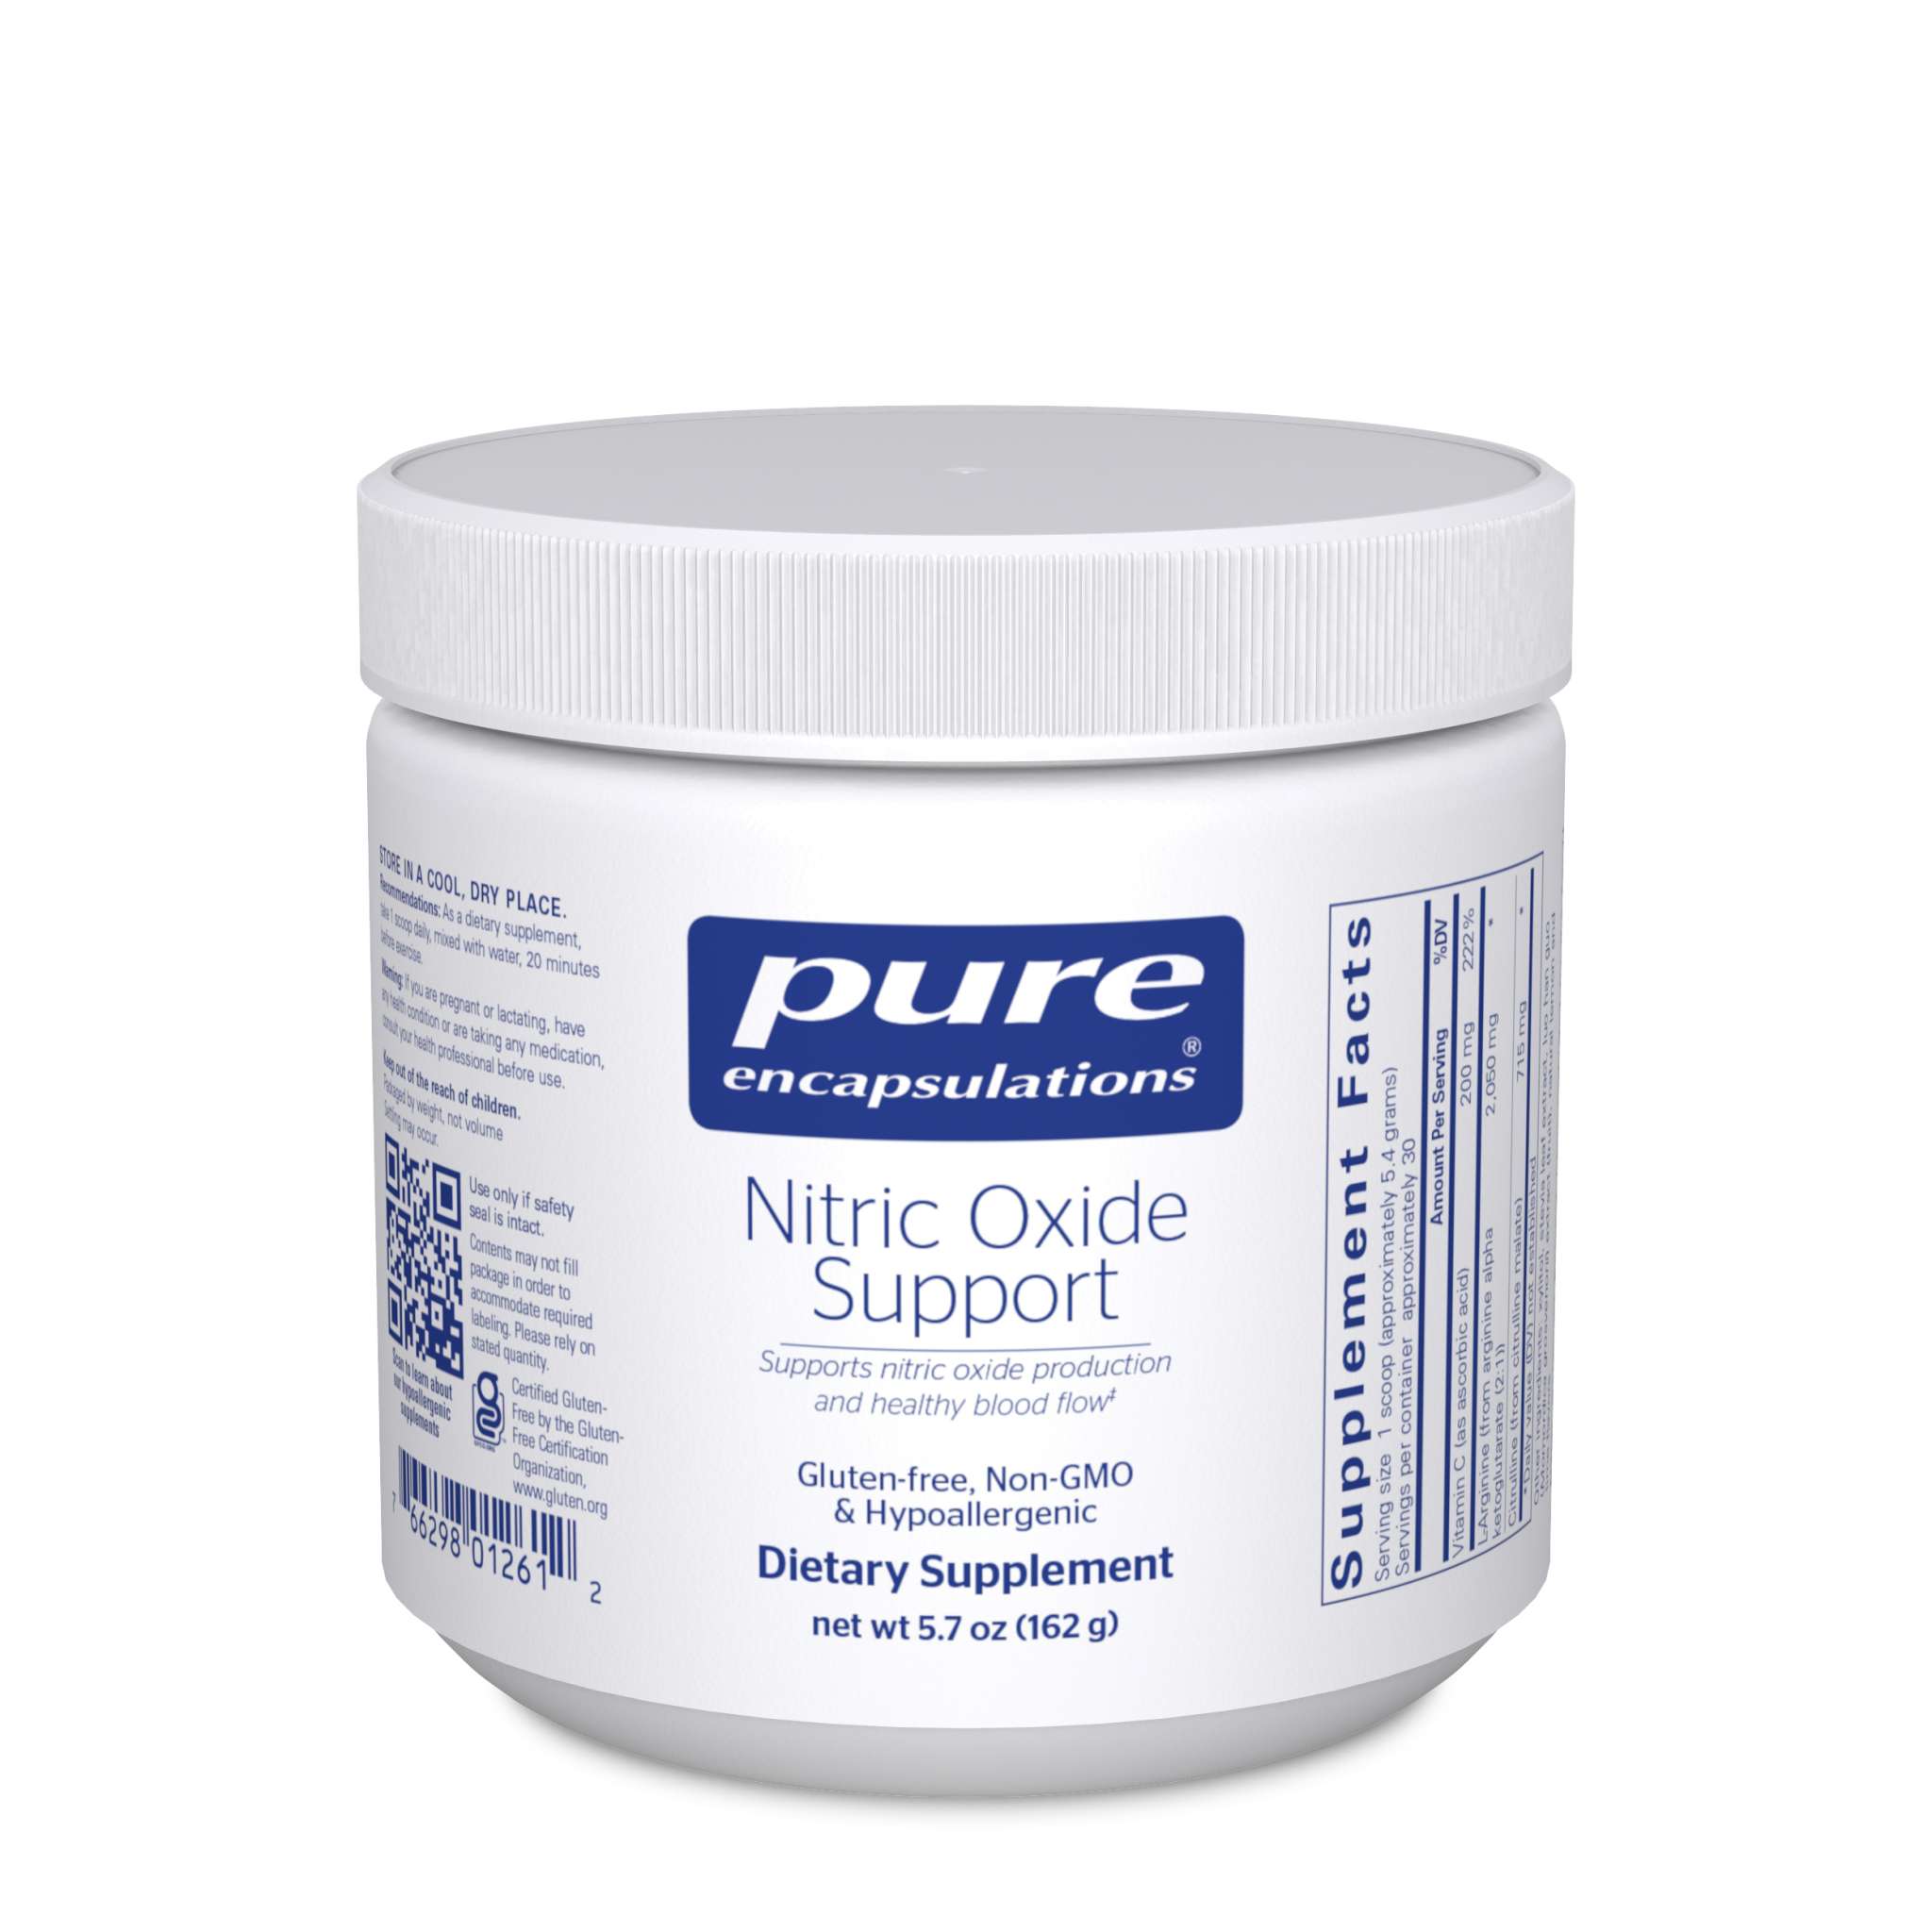 Pure Encapsulations - Nitric Oxide Support powder